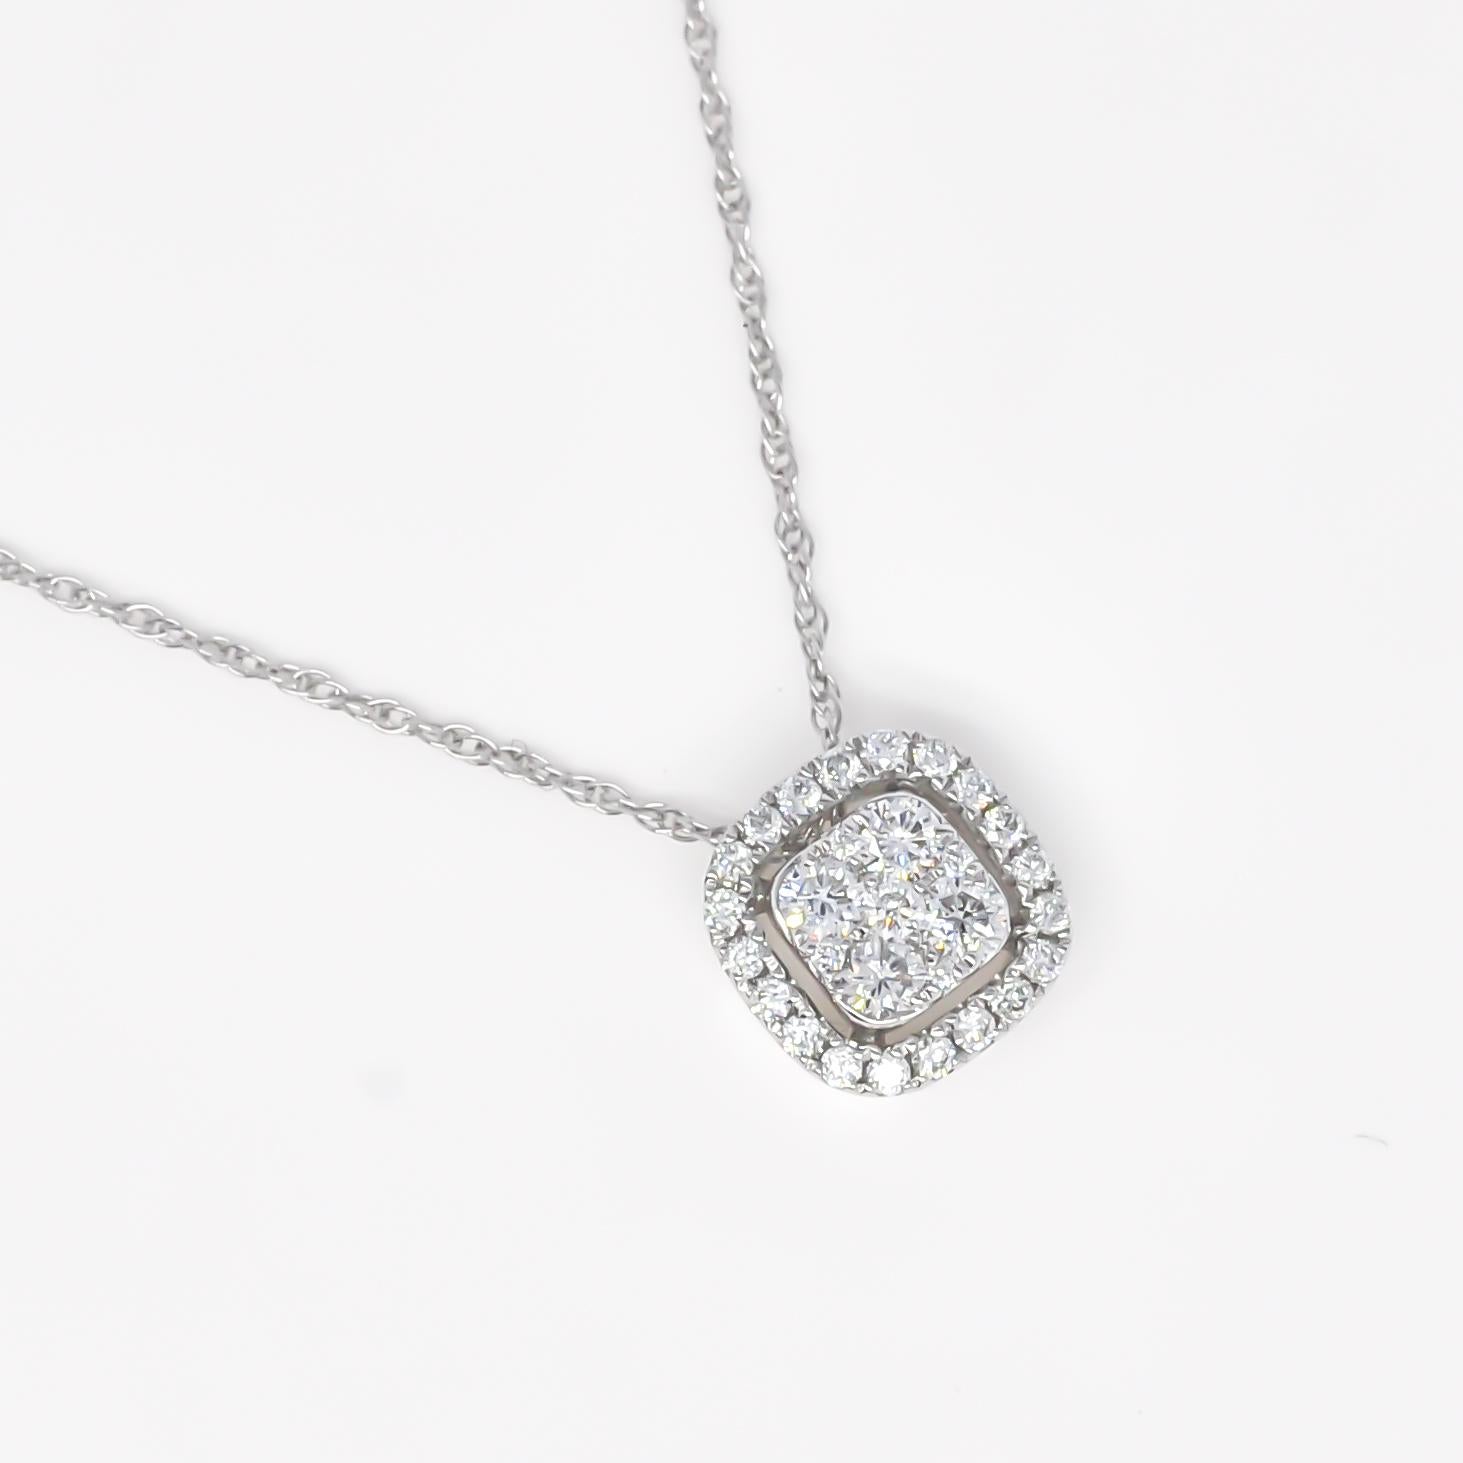 Elevate your jewelry collection with this captivating 18KT White Gold Round Diamonds Square Cluster Halo Illusion Pendant Necklace. 

With a total diamond weight of 0.30 carats, this pendant necklace offers a perfect balance of understated elegance